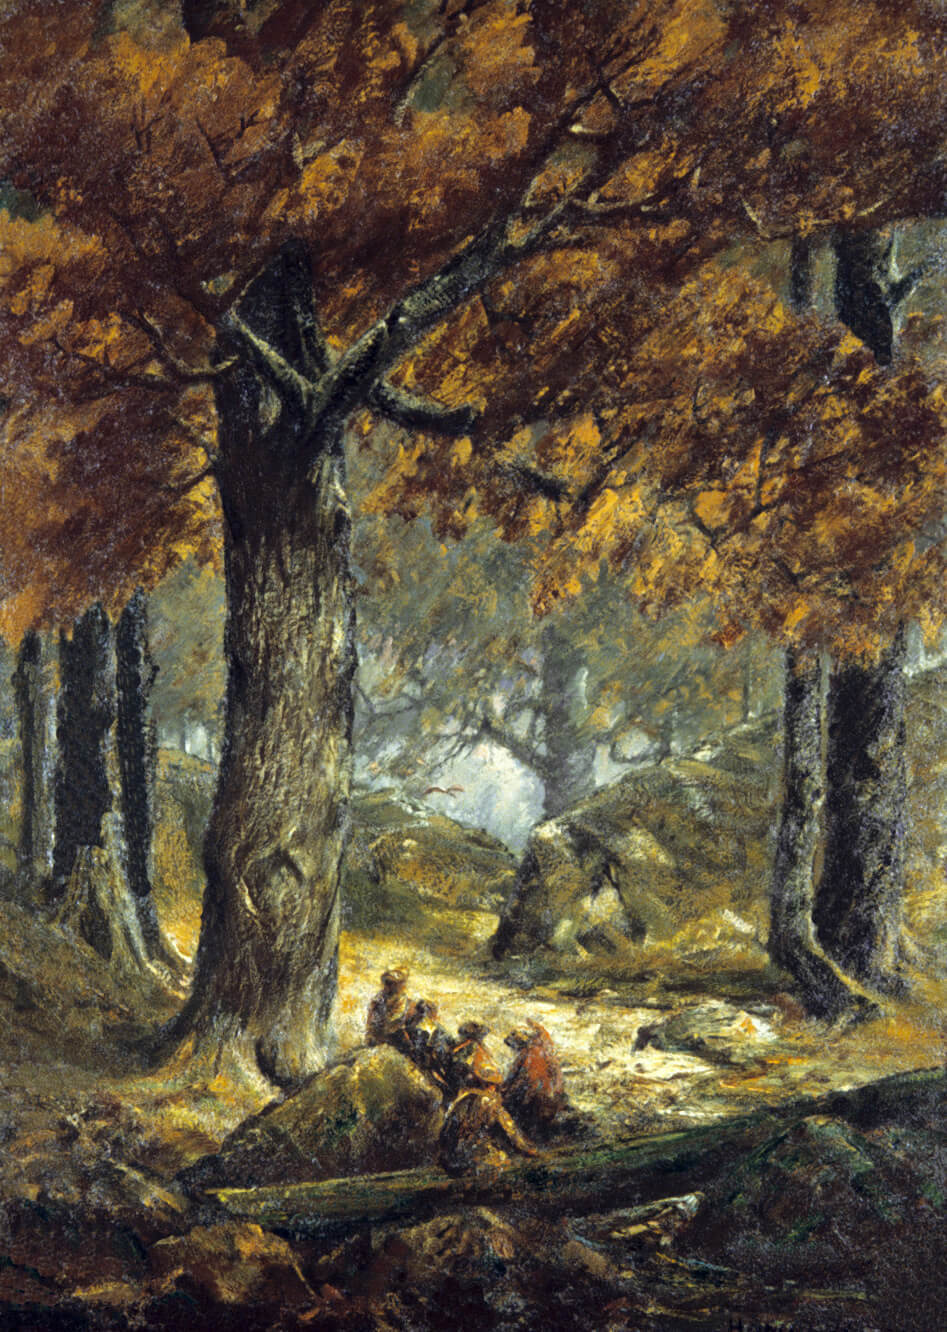 Homer Watson, Nut Gatherers in the Forest, 1900